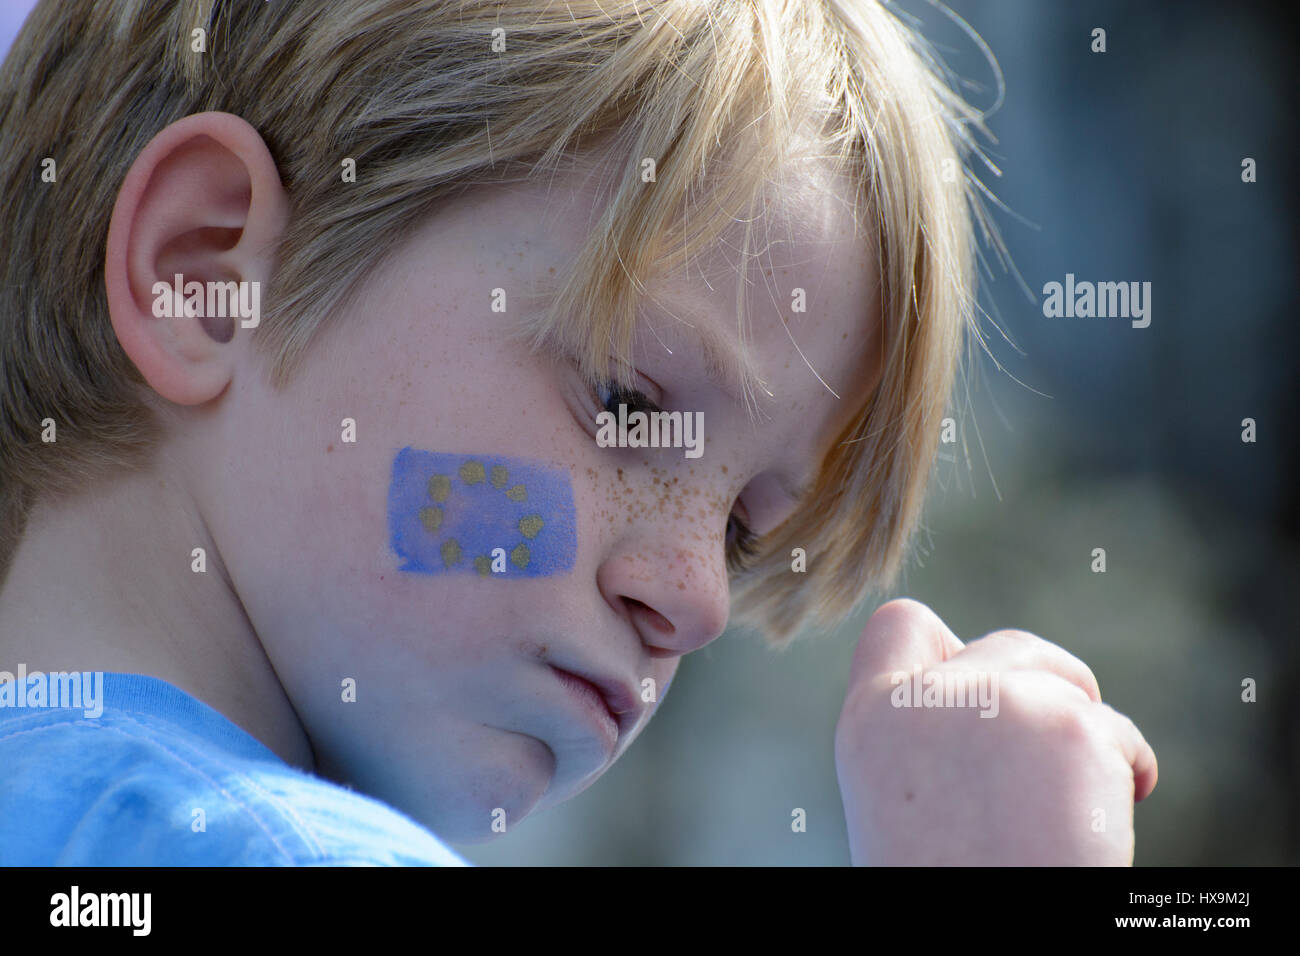 London, UK. 25th Mar 2017. Portrait of a child anti-brexit protester with a blue EU flag drawn over the cheek. The young boy was amongst the thousands of protesters who participated in the Unite for Europe march in London. Credit: ZEN - Zaneta Razaite/Alamy Live News Stock Photo